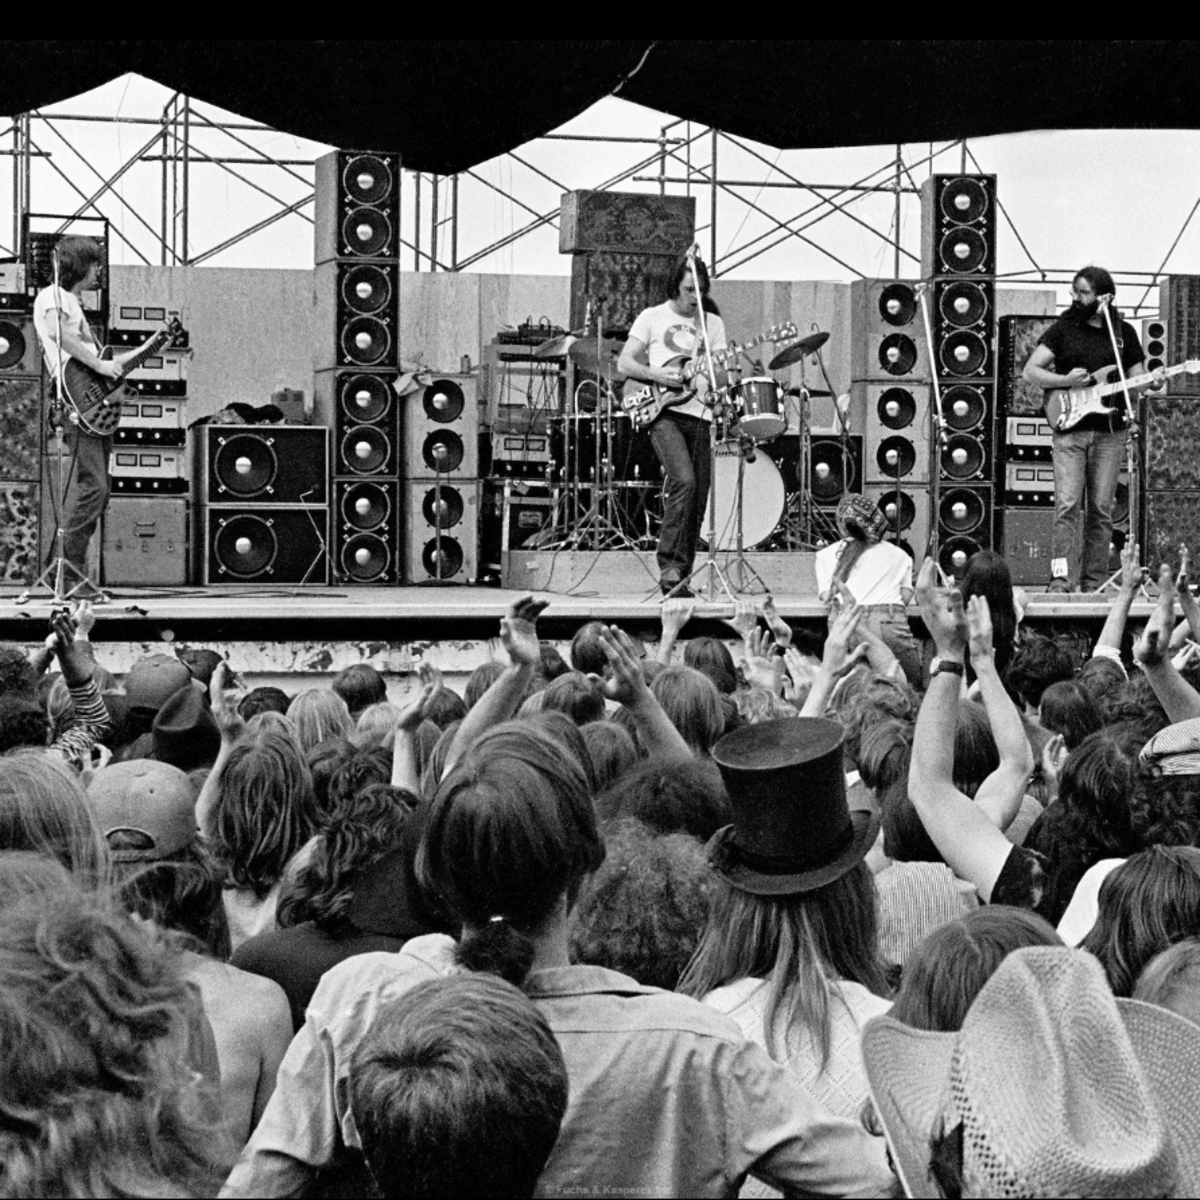 Grateful Dead box unreleased, sought-after shows for limited